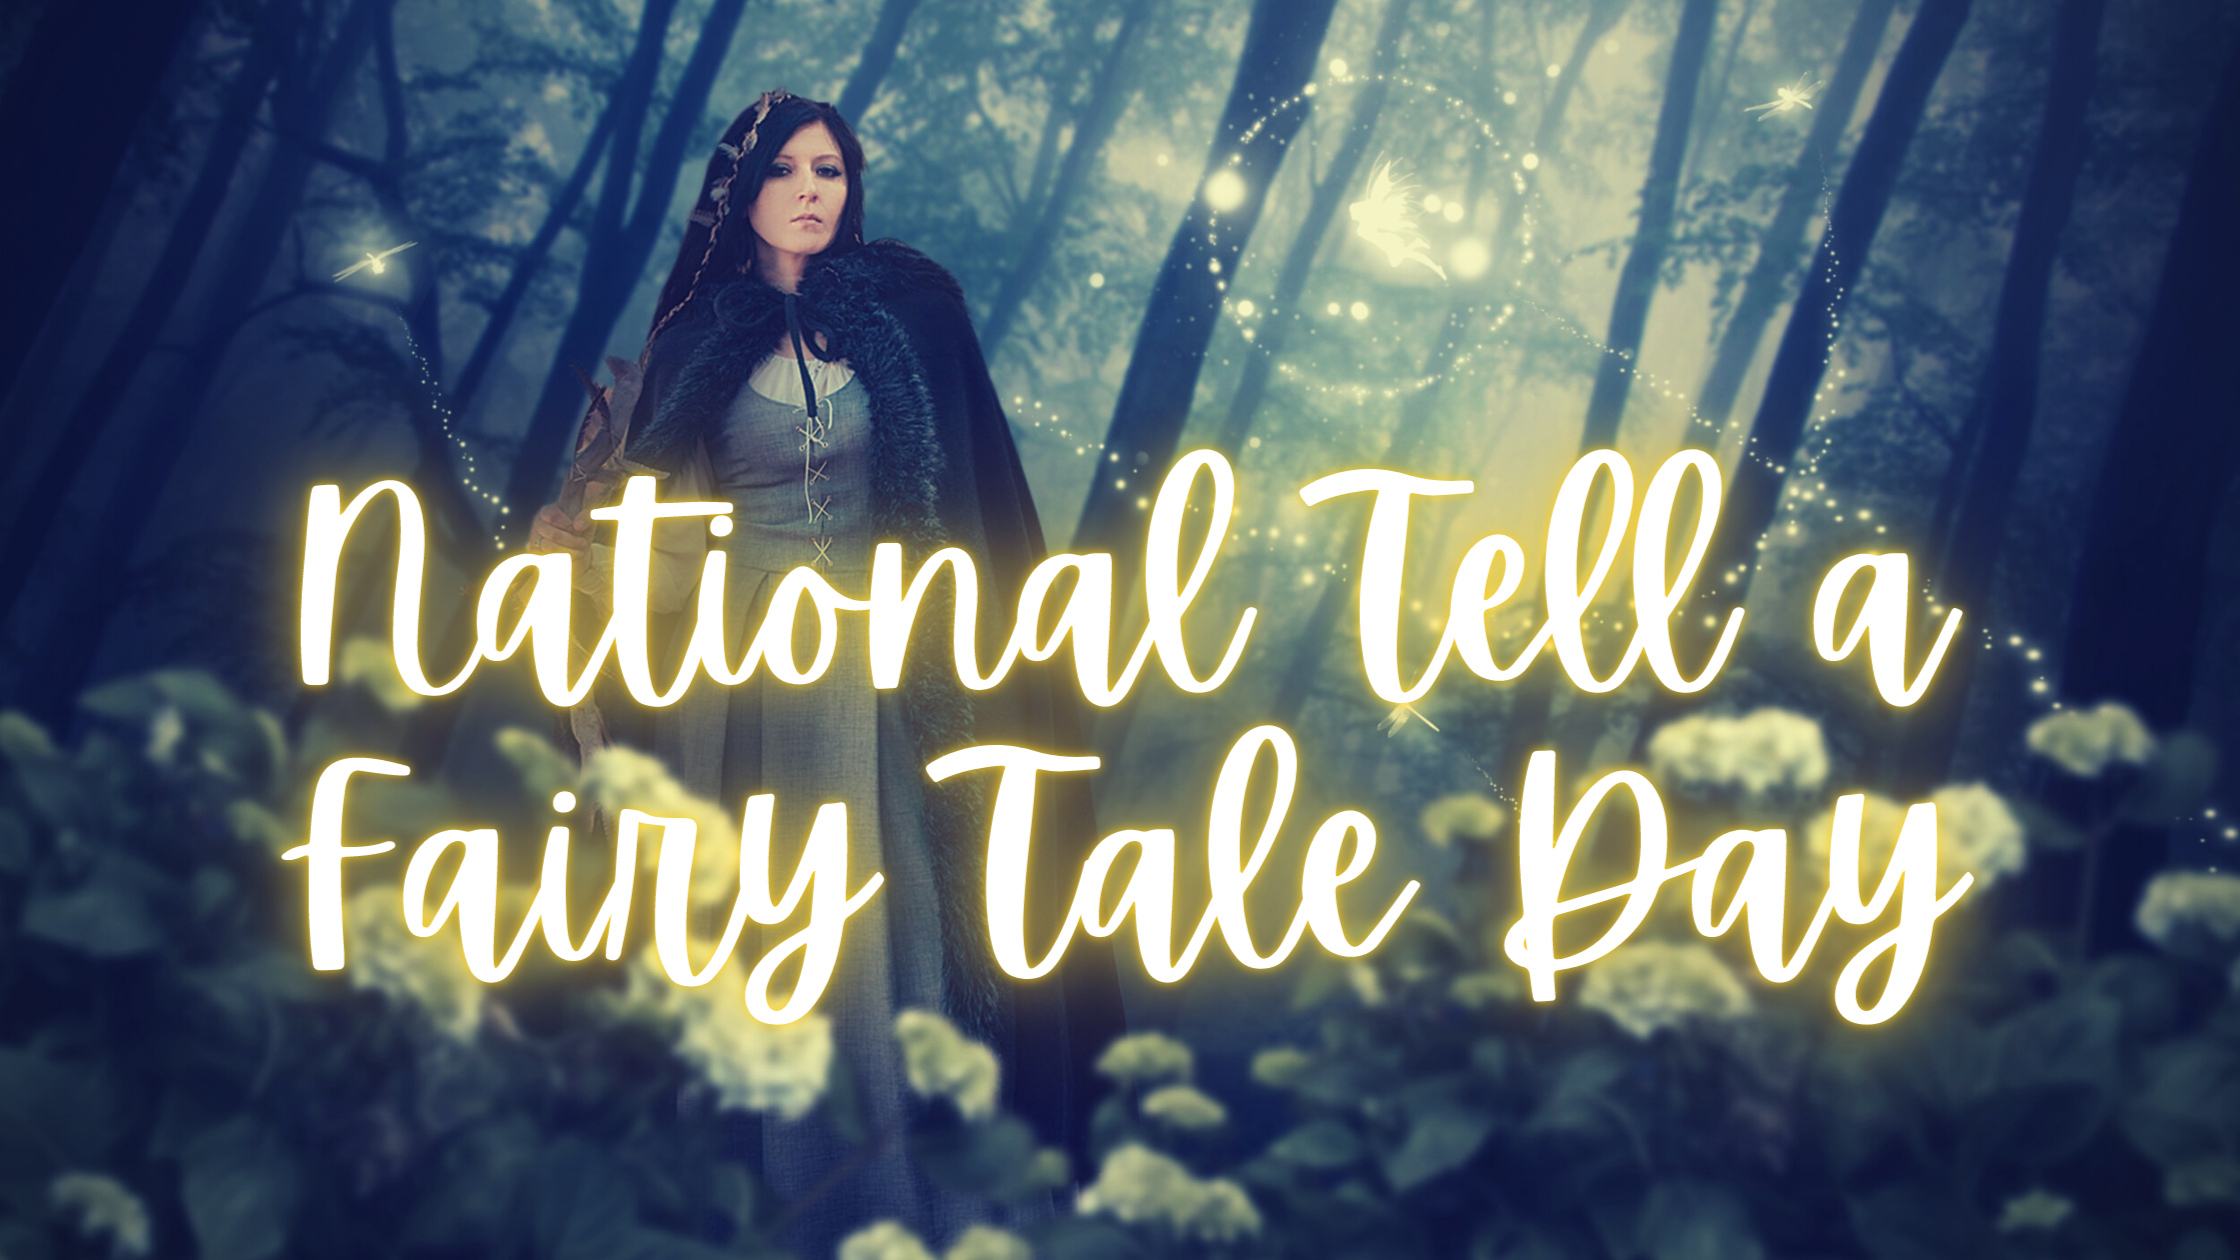 Share a fairy tale on National Tell a Fairy Tale Day 2023! - Bookelicious